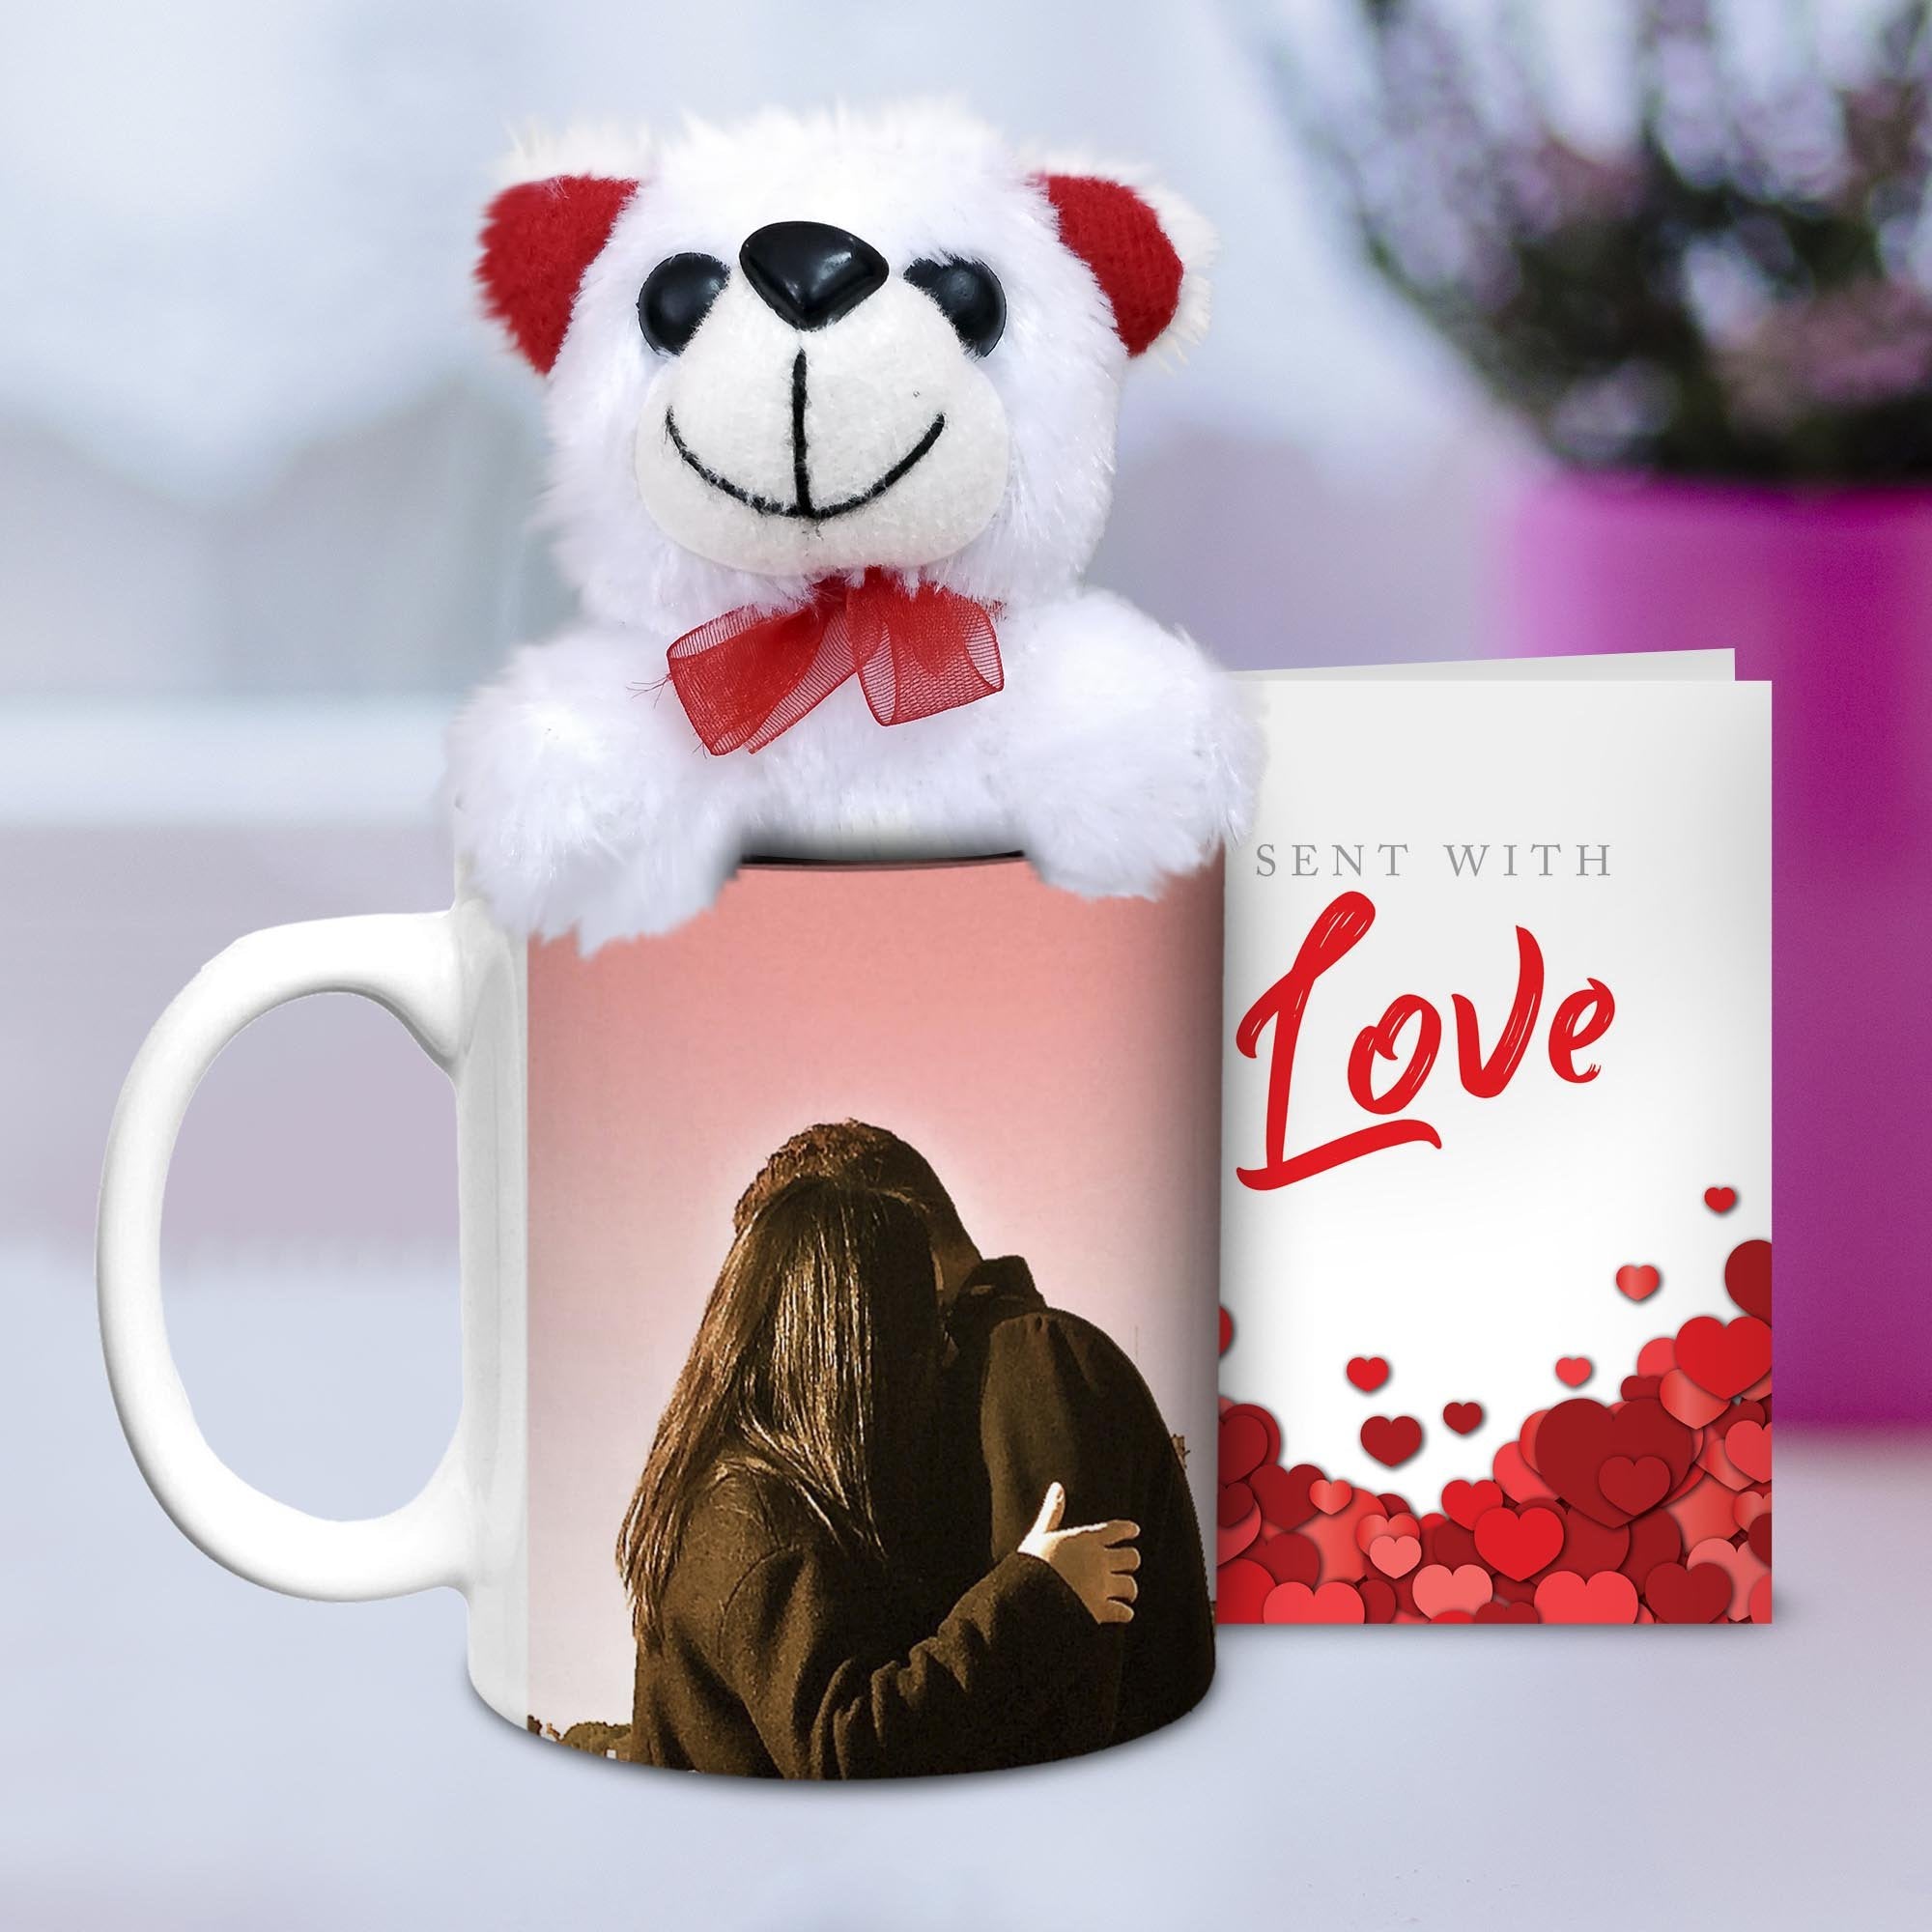 the-worlds-so-beautiful-with-teddy-card